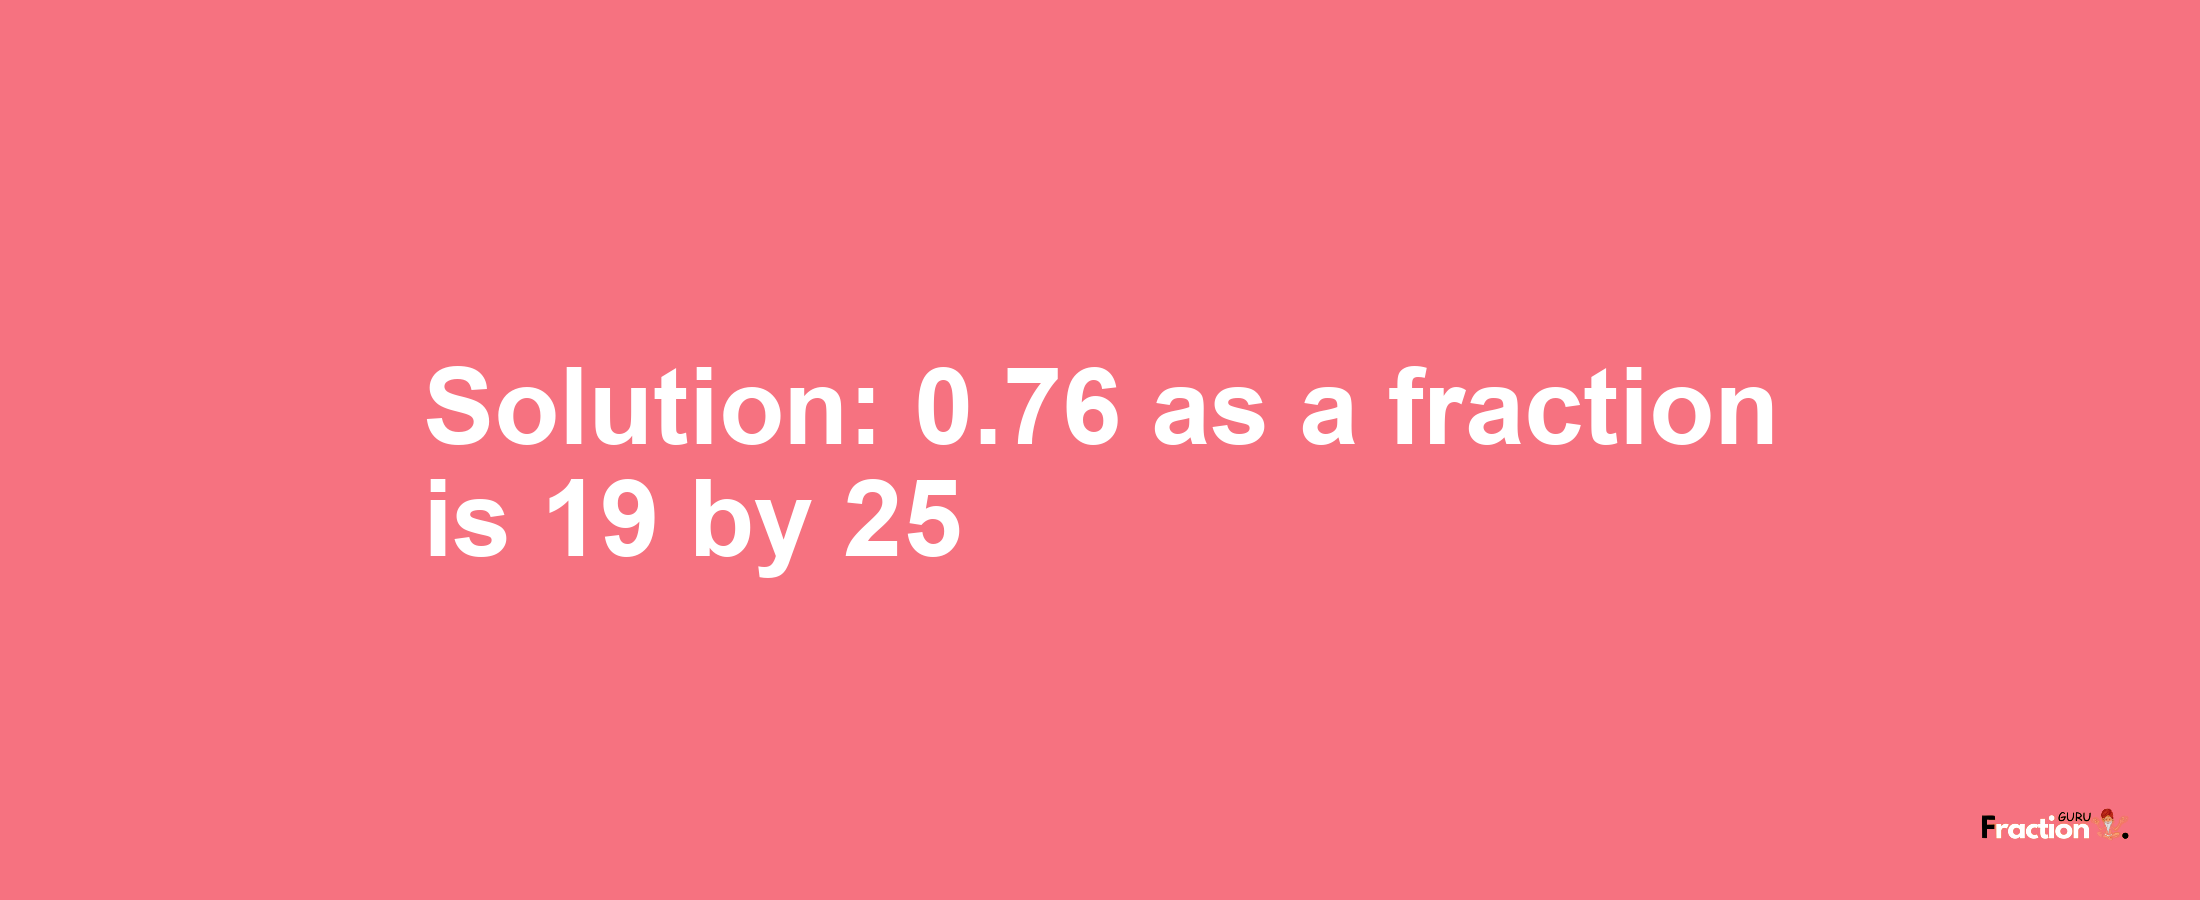 Solution:0.76 as a fraction is 19/25